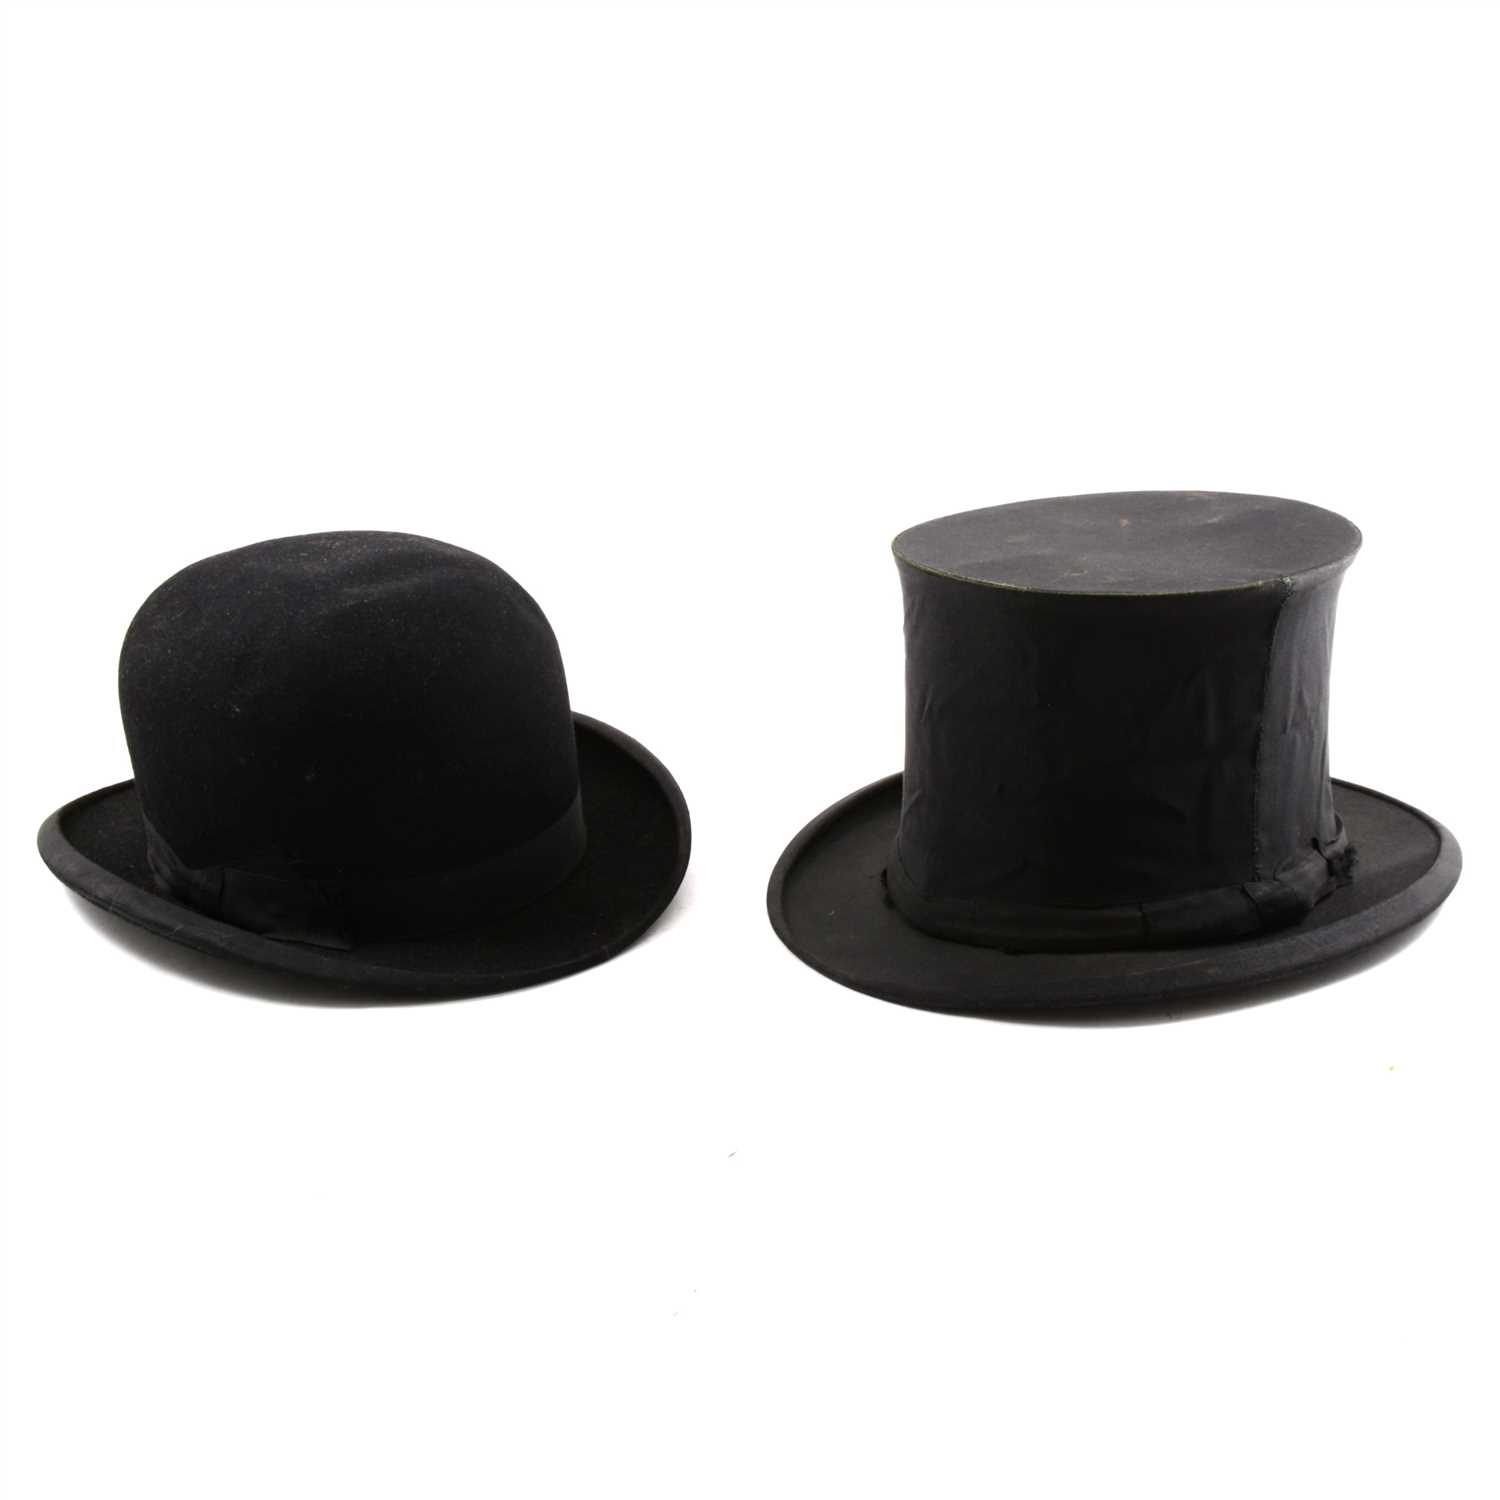 Lot 103 - An opera top hat and a black bowler "Superfine" bowler, pair of ankle guards.